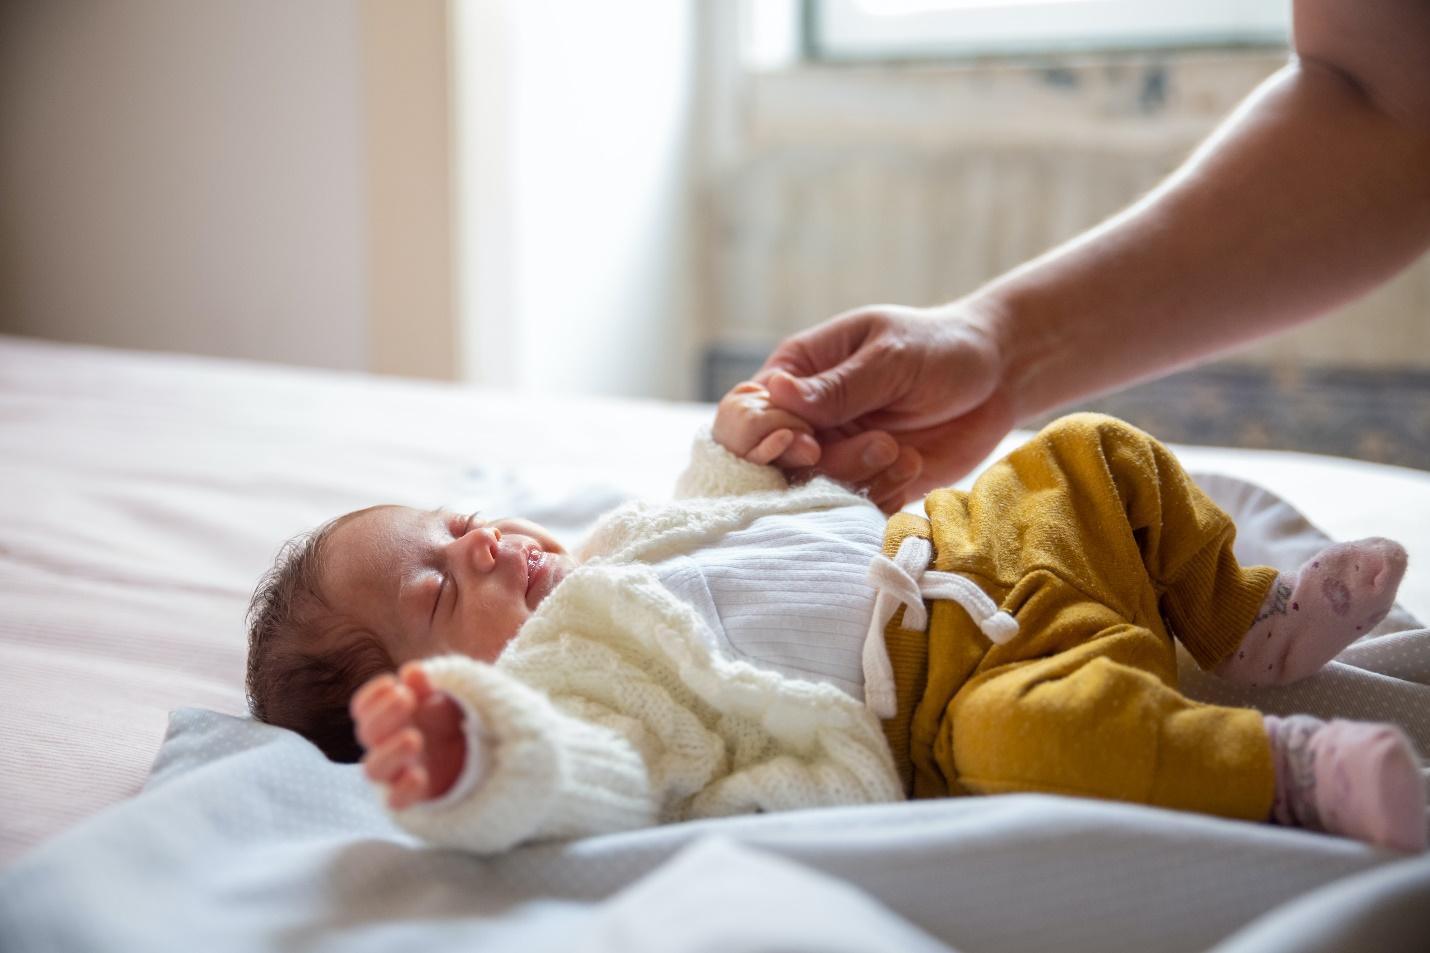 Four Baby care tips for first-time parents